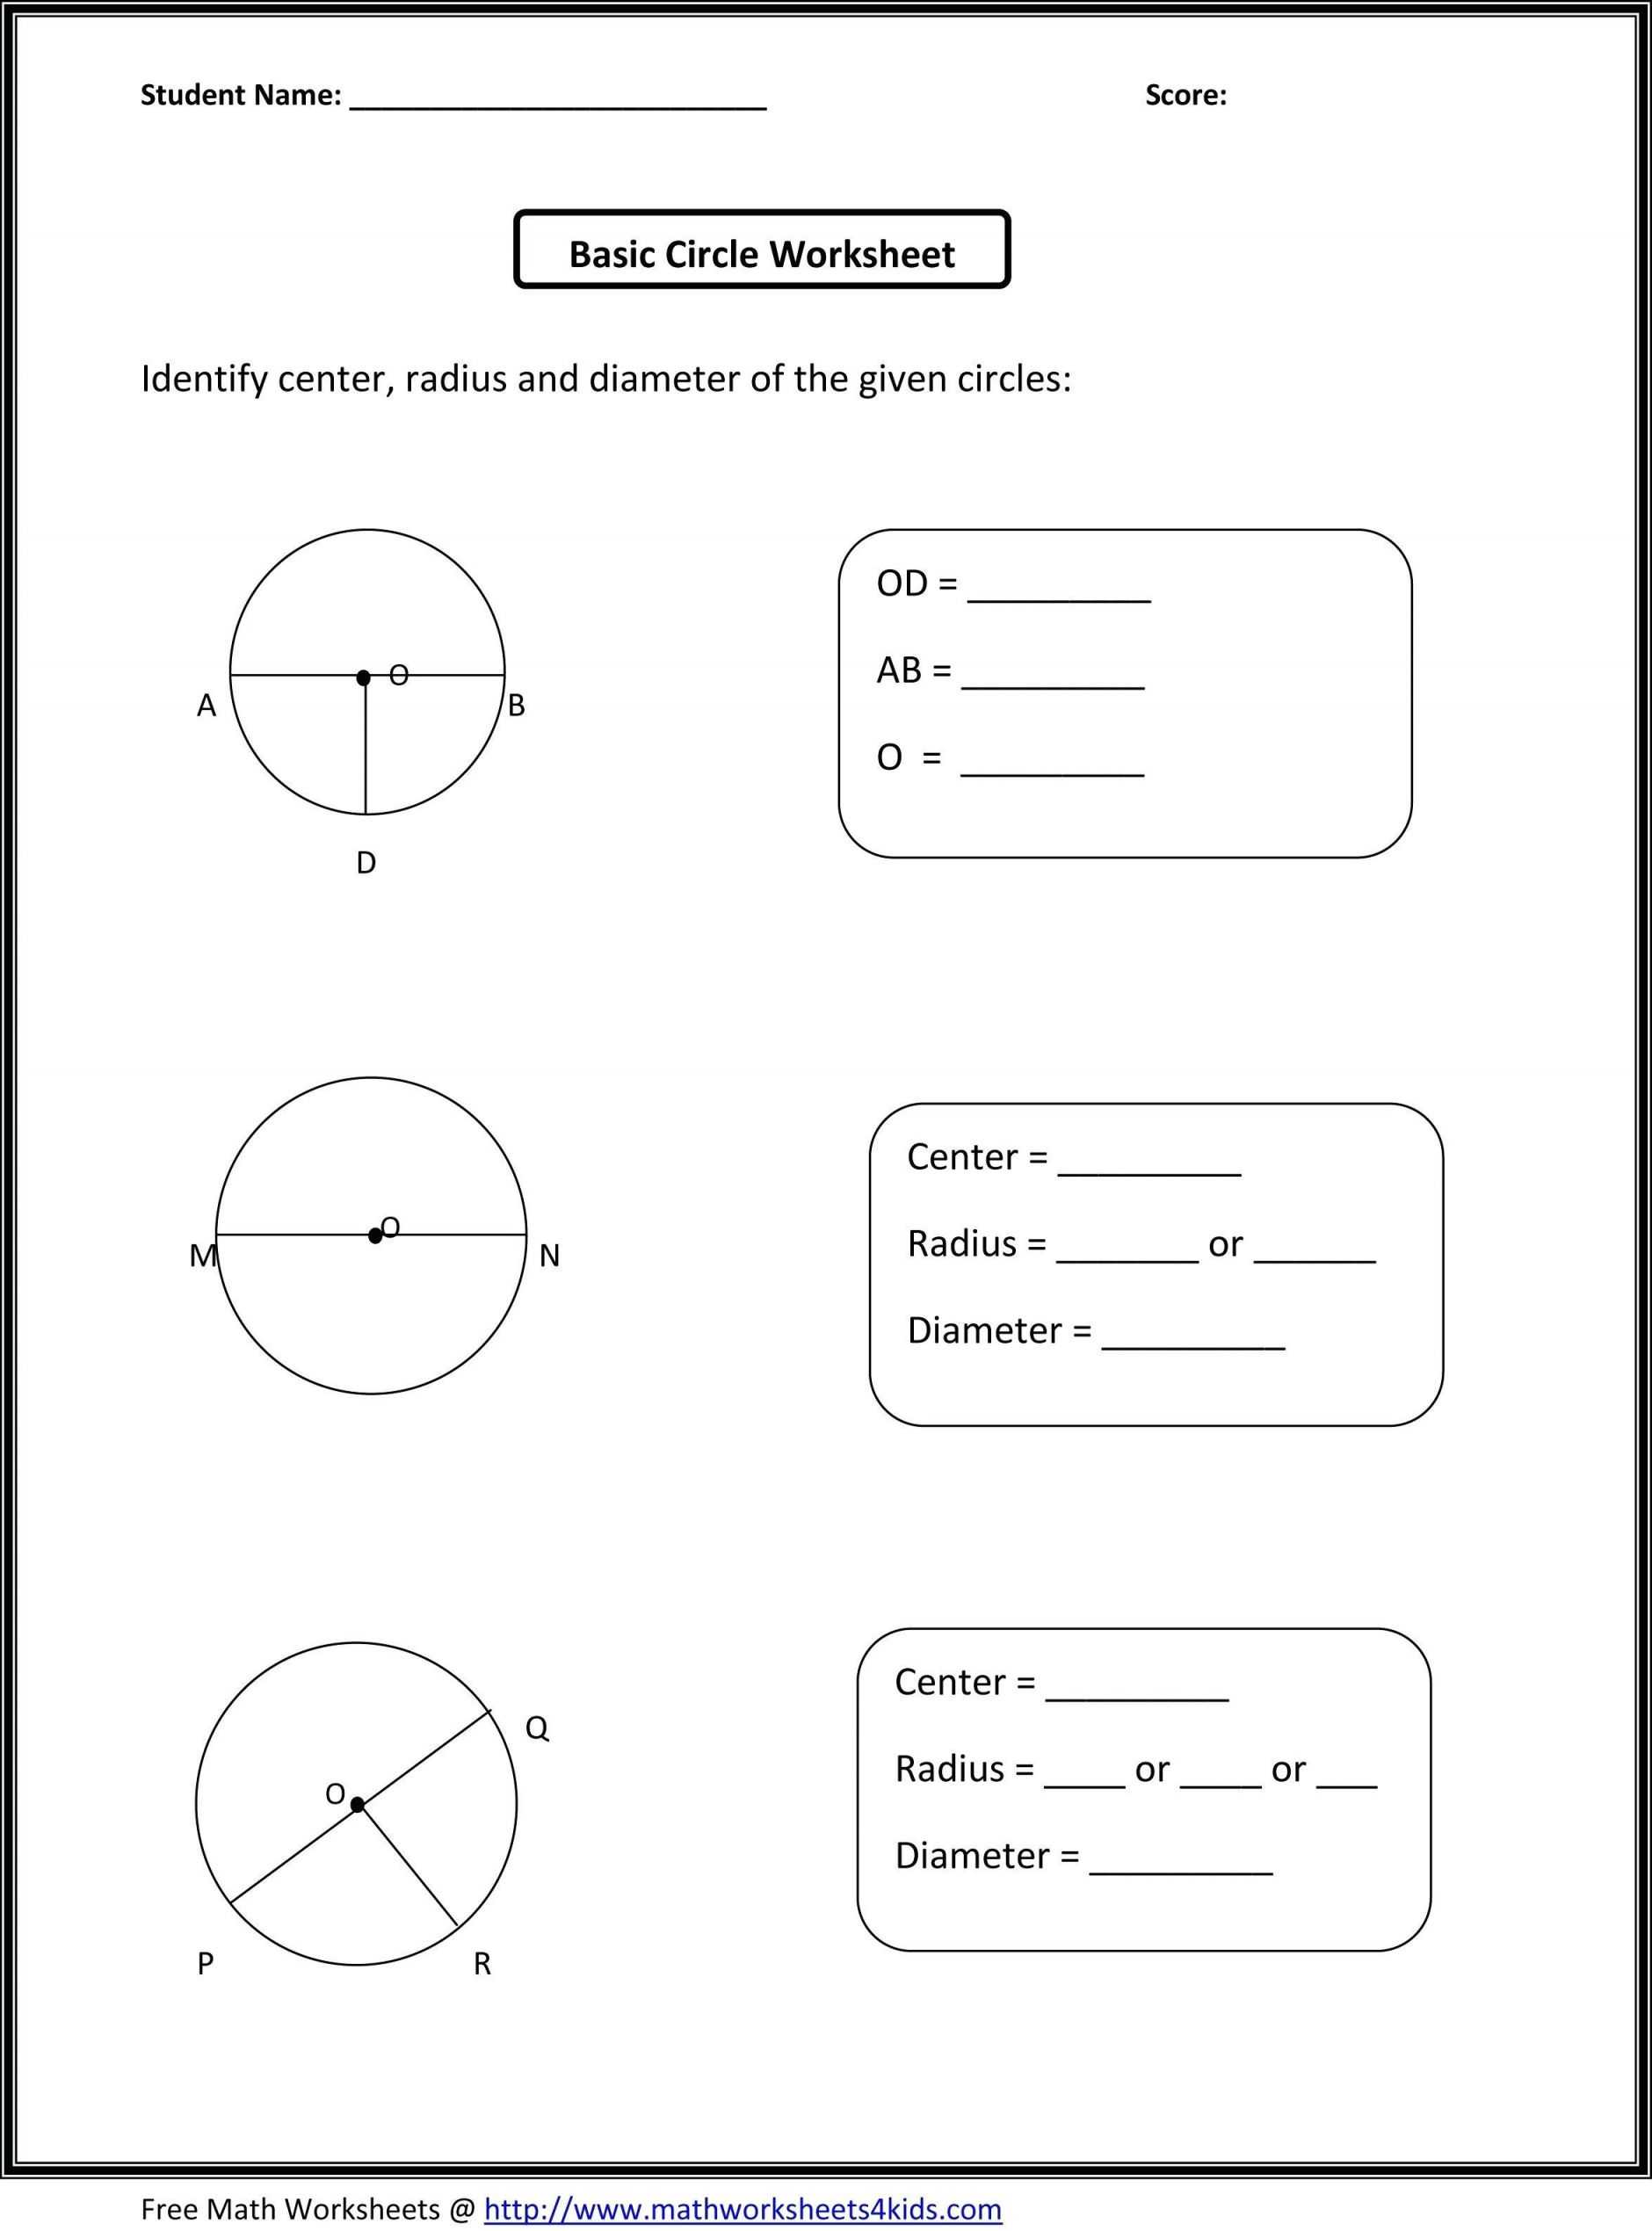 History Of Halloween Worksheet Answers together with Excellent the Biology Osmosis Jones Answers Ia72 – Documentaries